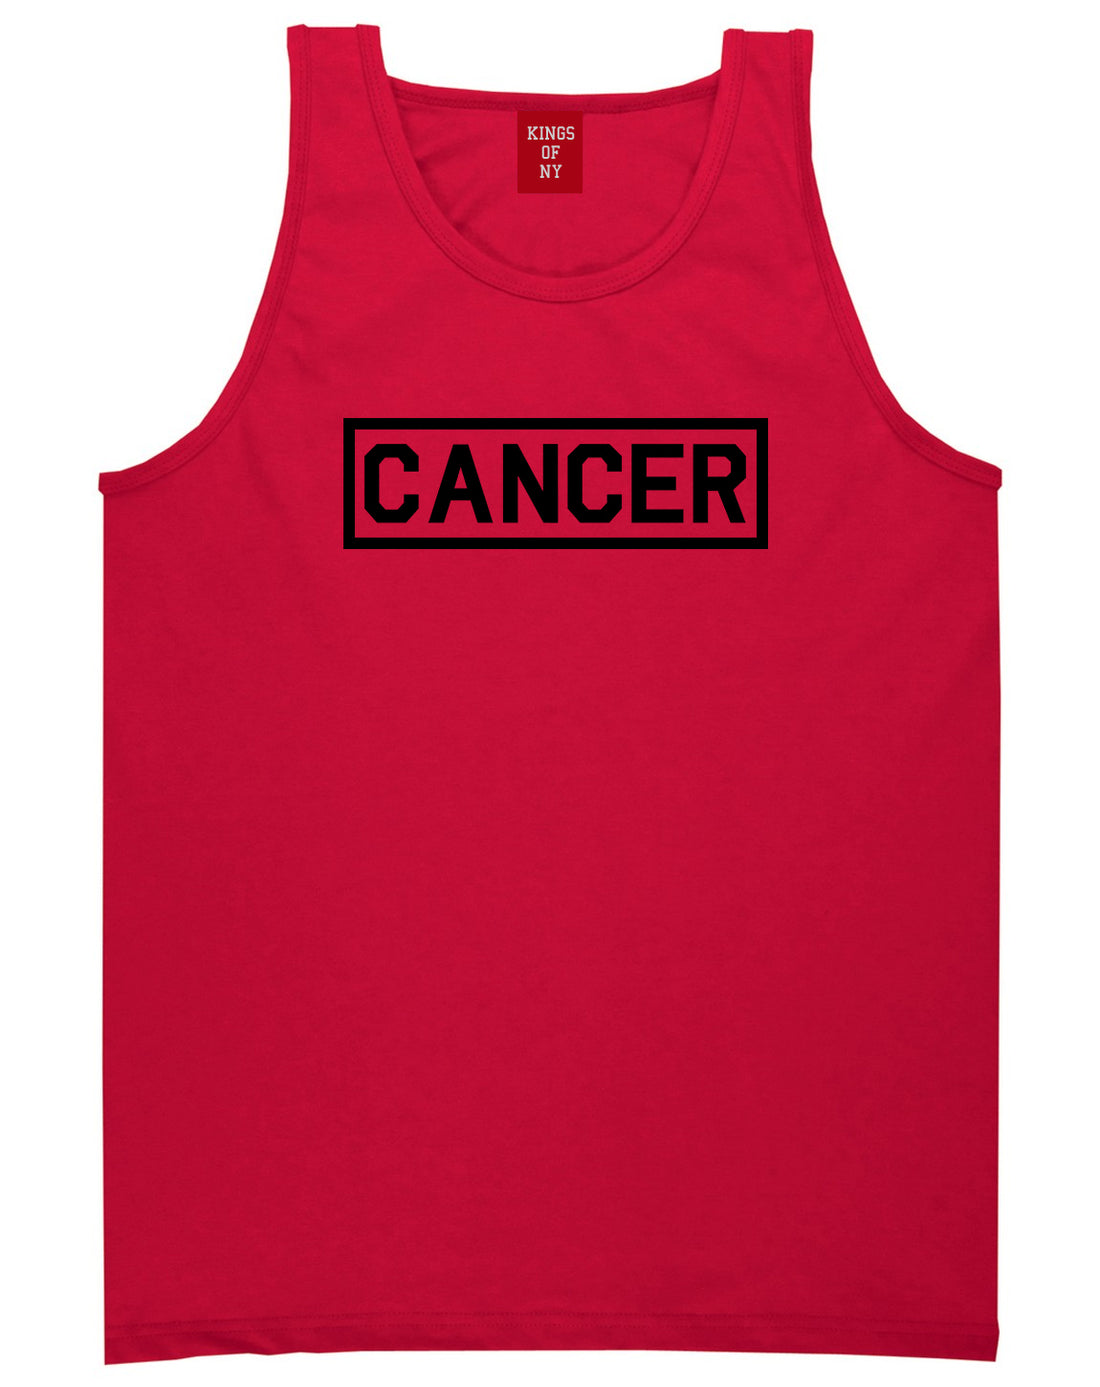 Cancer Horoscope Sign Mens Red Tank Top Shirt by KINGS OF NY